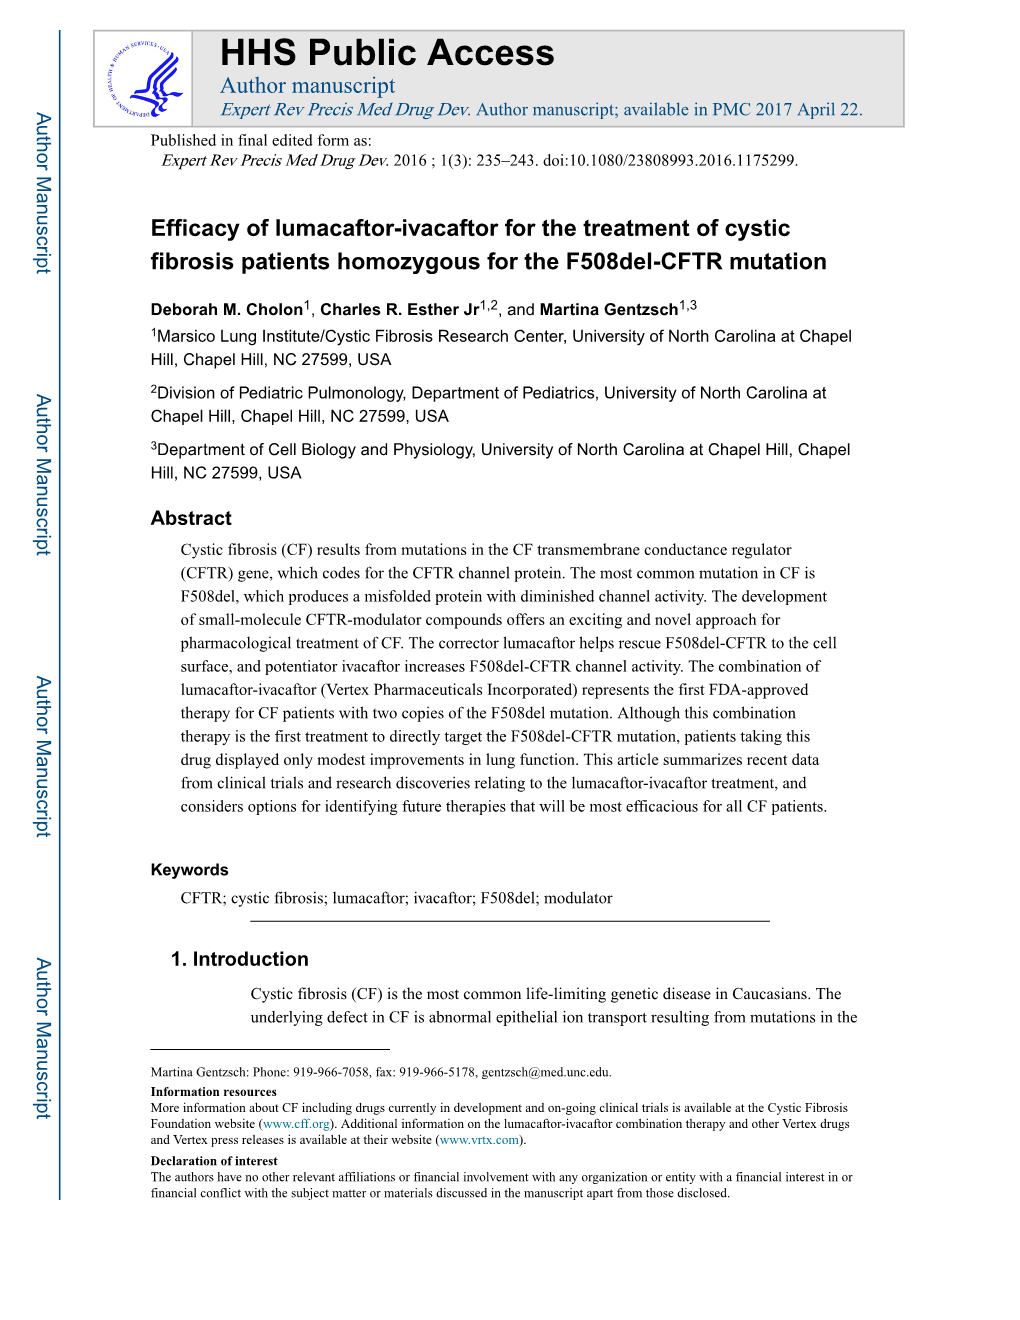 Efficacy of Lumacaftor-Ivacaftor for the Treatment of Cystic Fibrosis Patients Homozygous for the F508del-CFTR Mutation